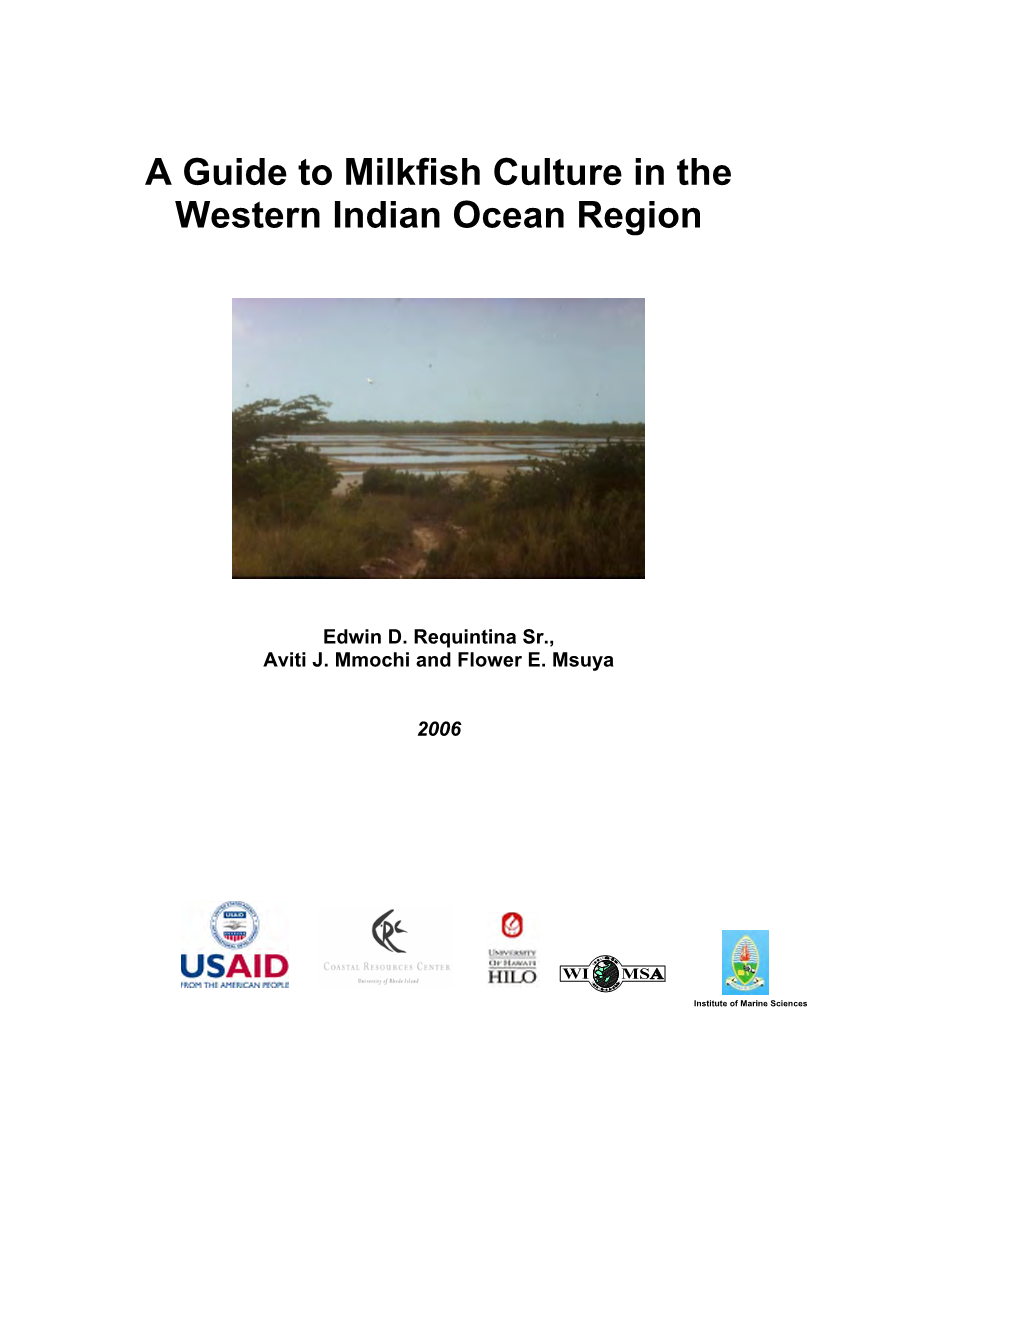 A Guide to Milkfish Culture in the Western Indian Ocean Region